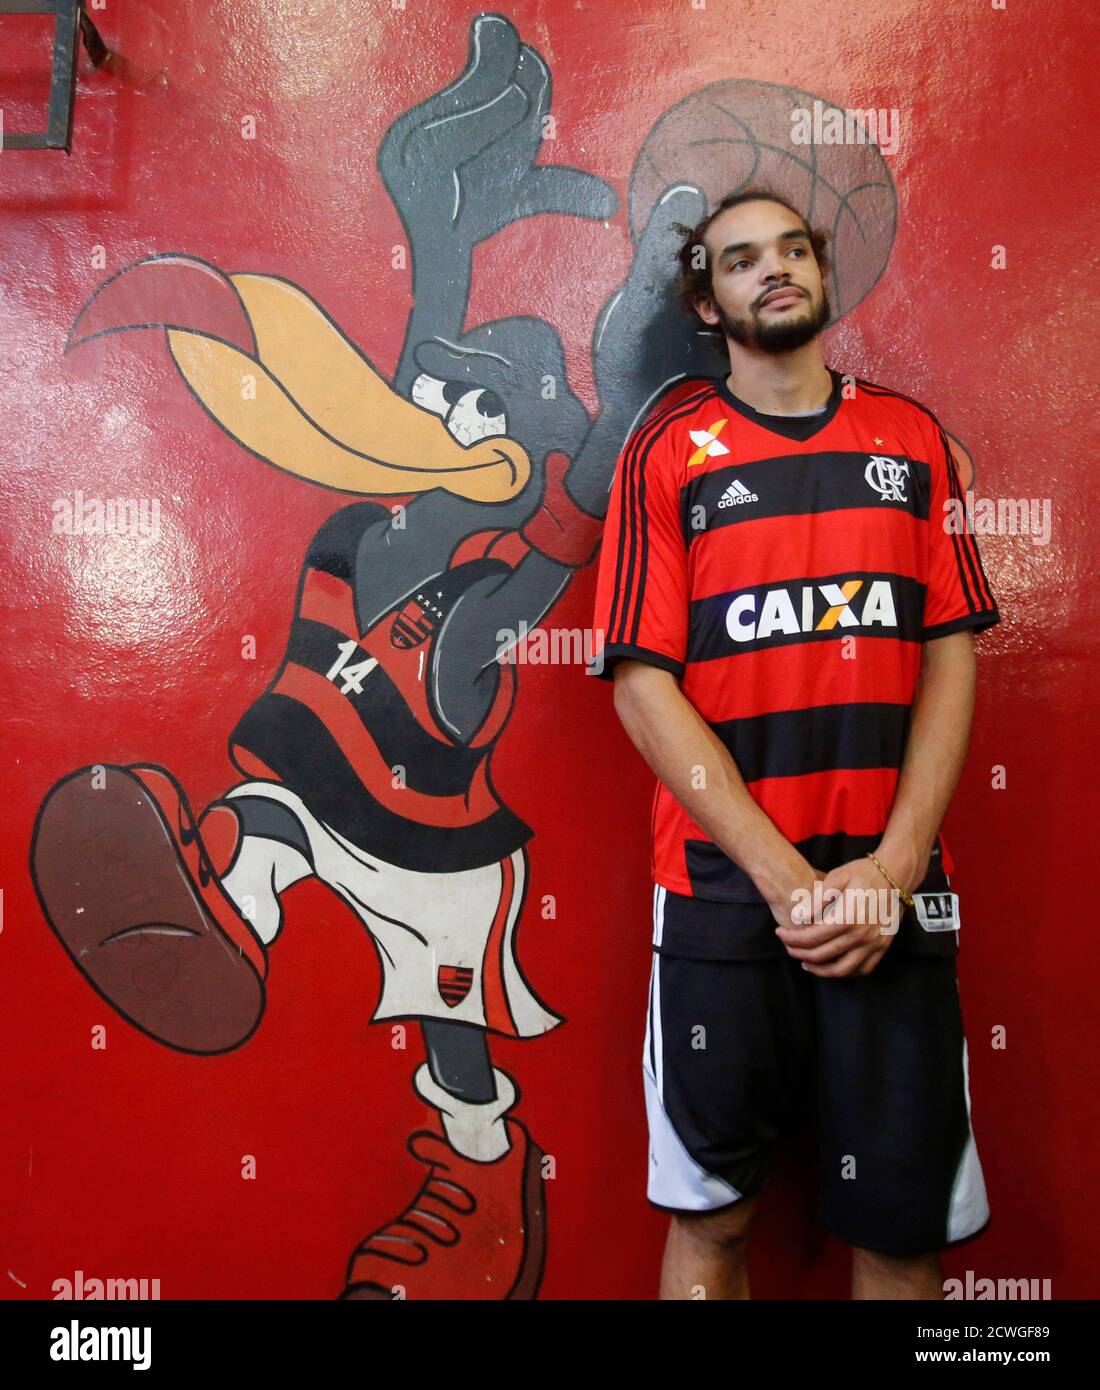 Chicago Bulls' Joakim Noah poses with Brazil's Flamengo soccer club jersey  after his training session ahead of NBA Global Games Rio 2013 in Rio de  Janeiro October 9, 2013. The Bulls will